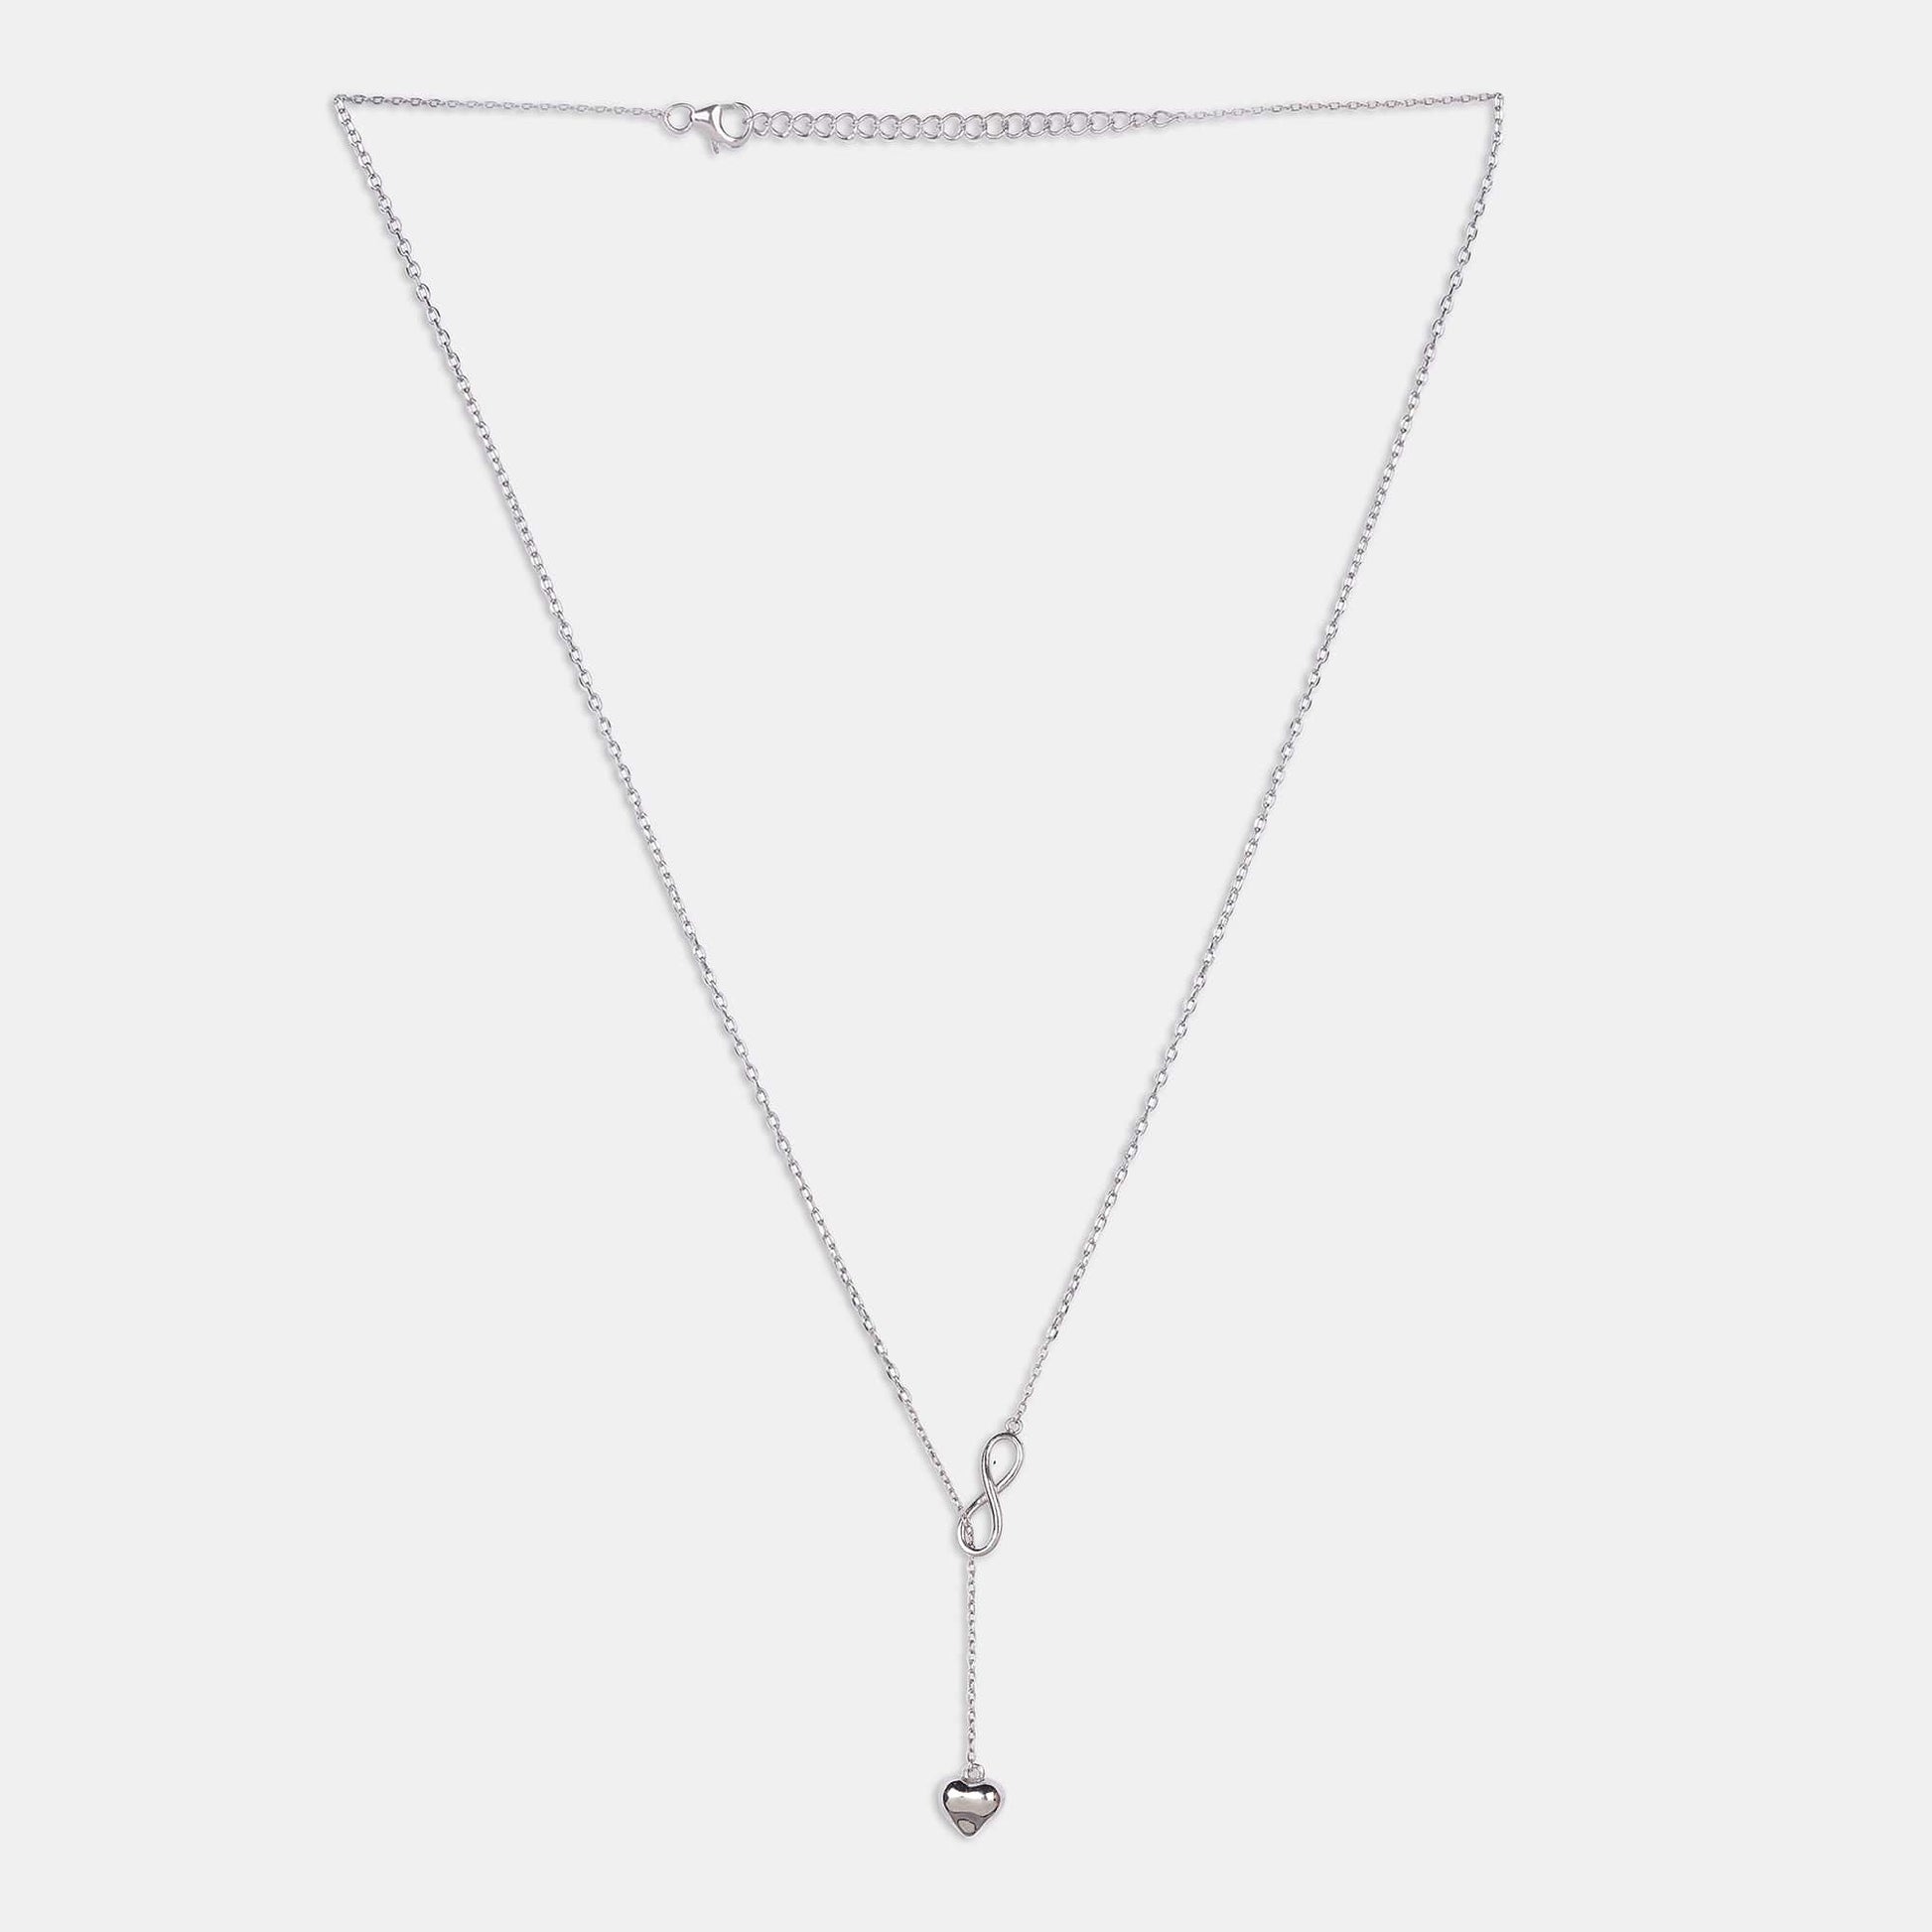 Discover the elegance of our silver Love Raindrop Pendant